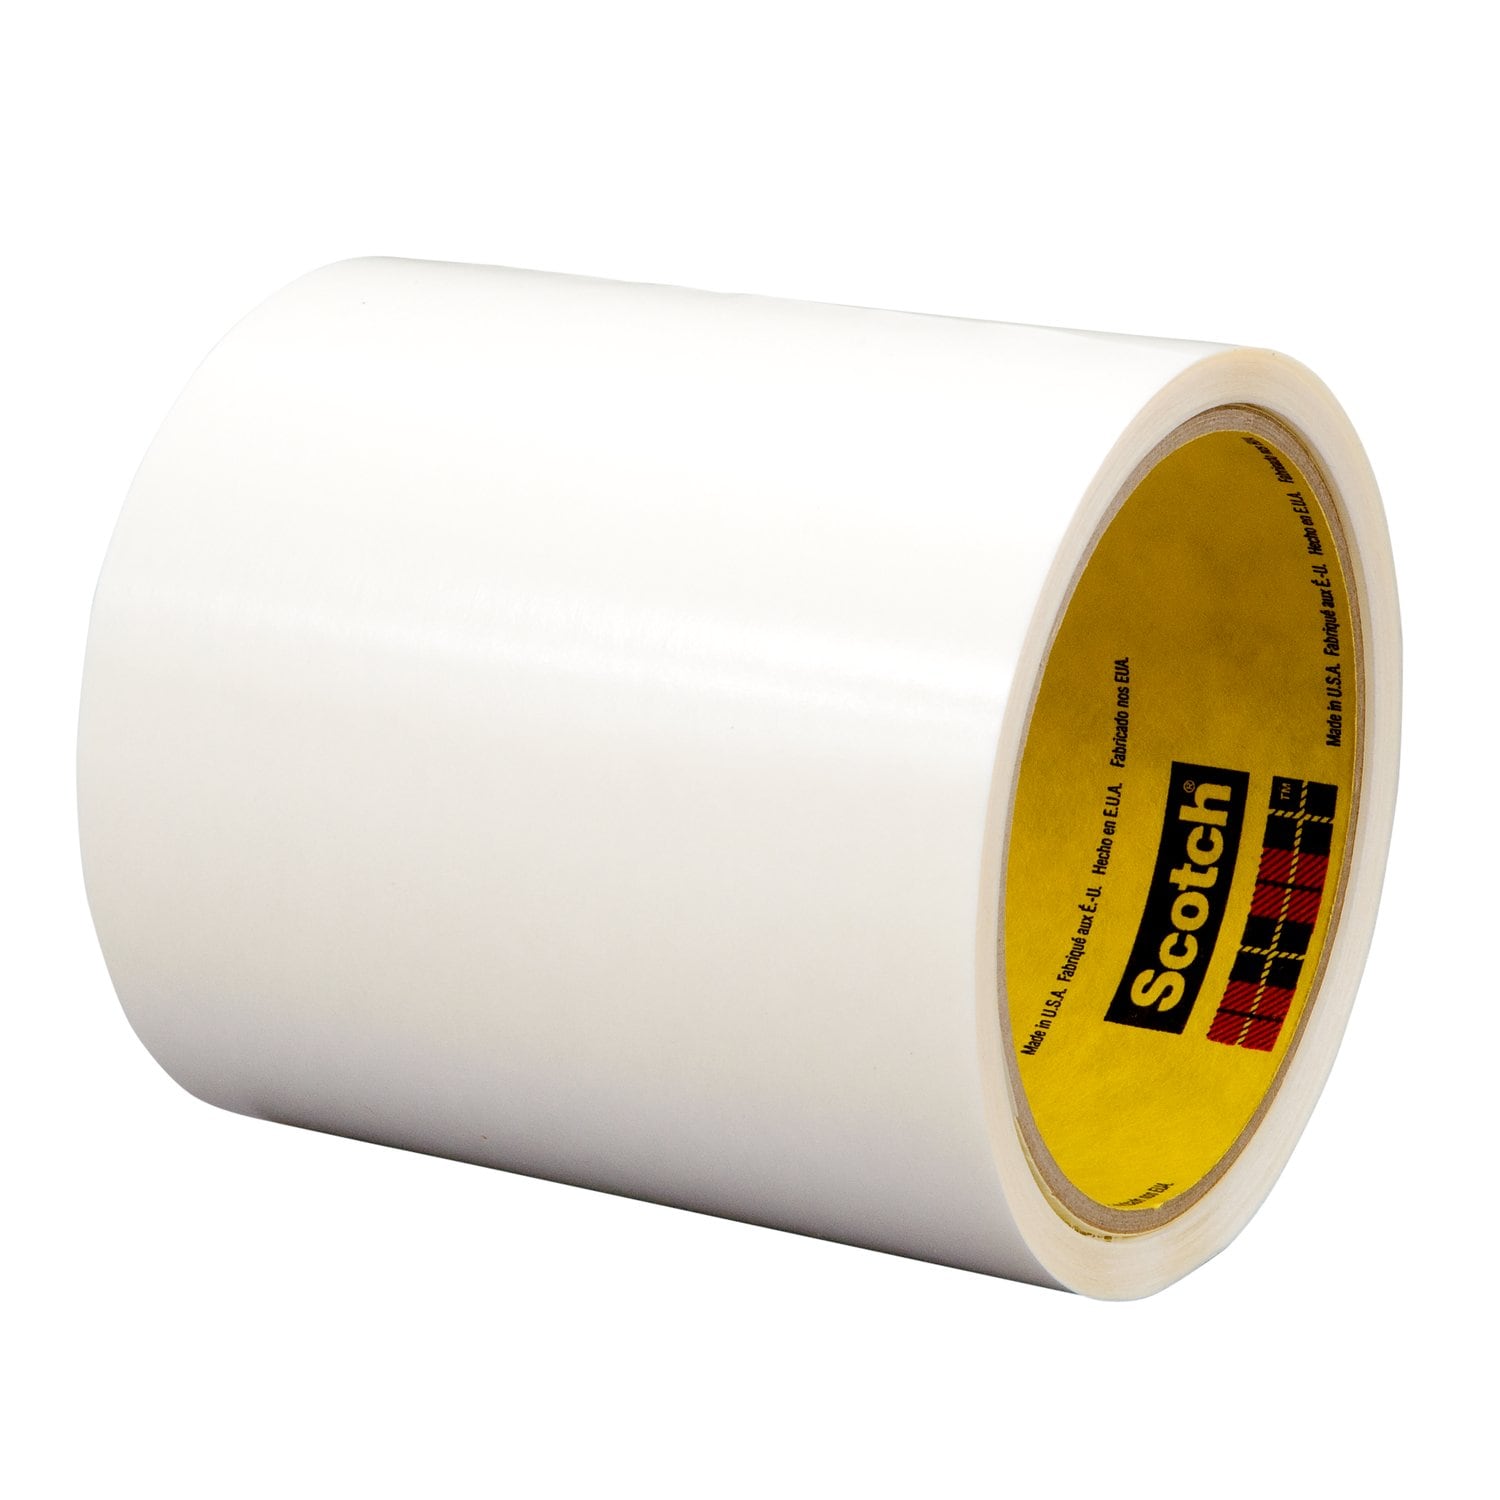 7010379075 - 3M Double Coated Tape 9828, Clear, 54 in x 250 yd, 4 mil, 1 roll per
case